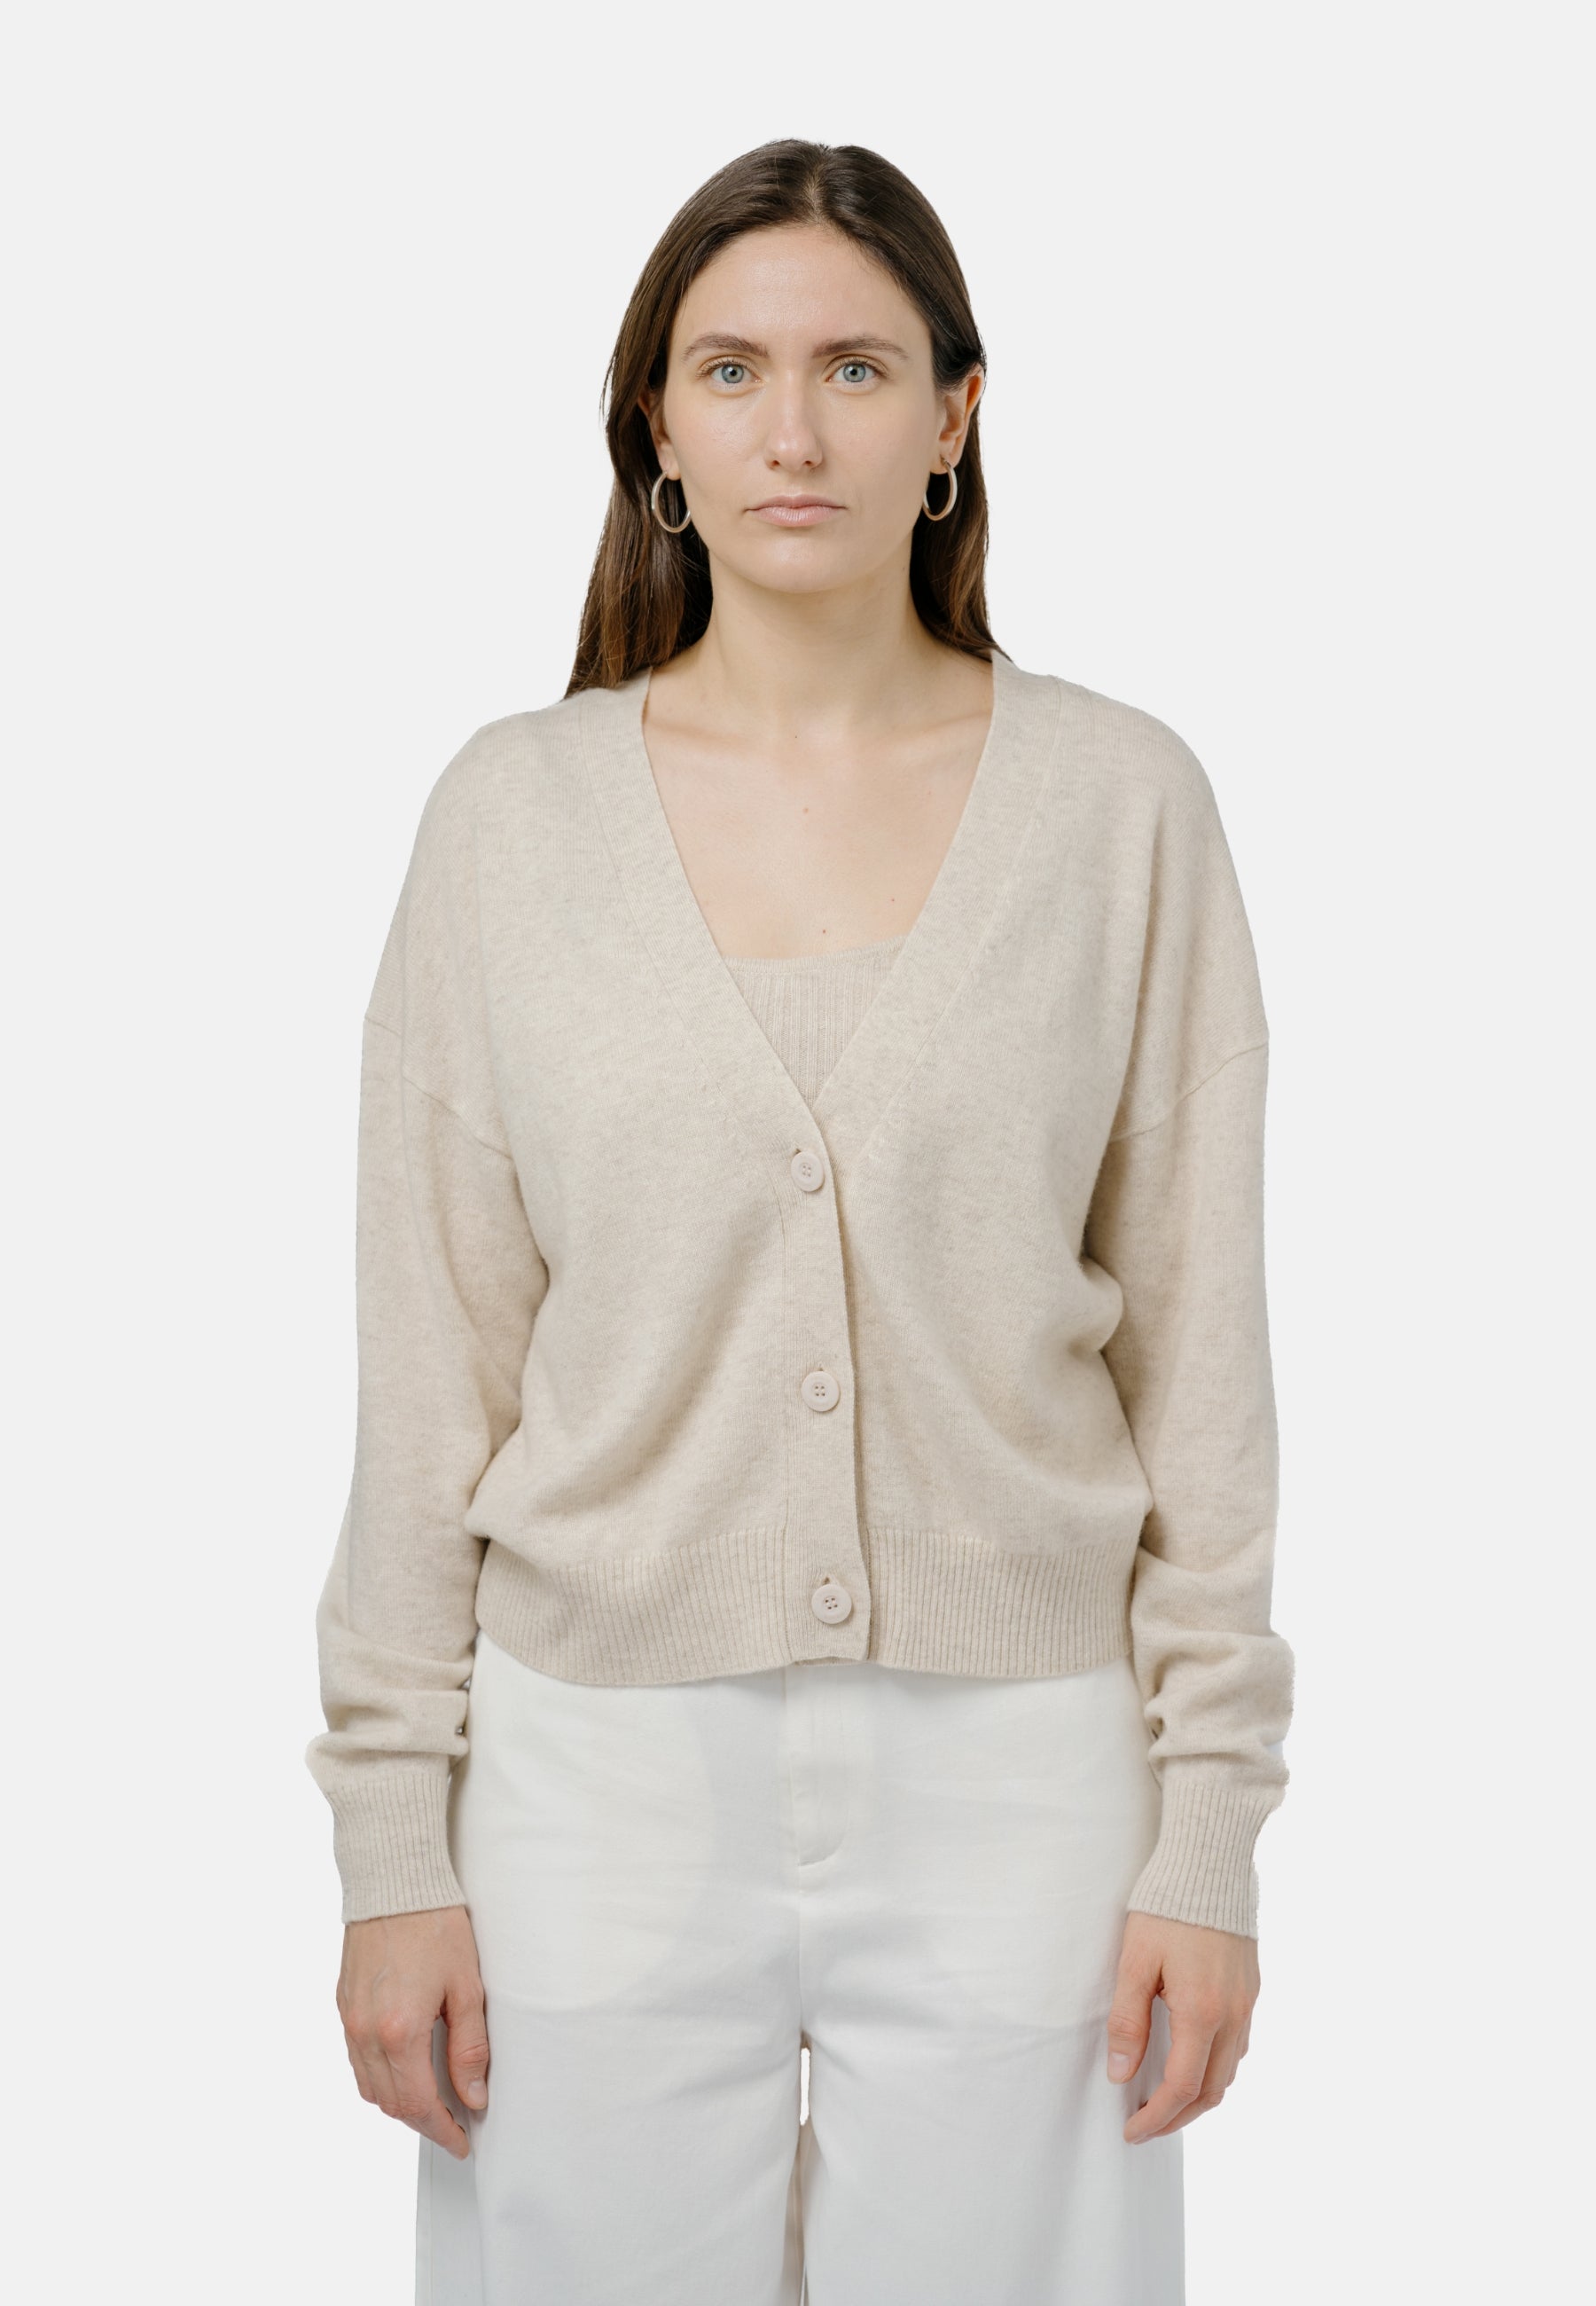 Beige Cardigan Ulaanbaatar made of 100% cashmere by 1 People